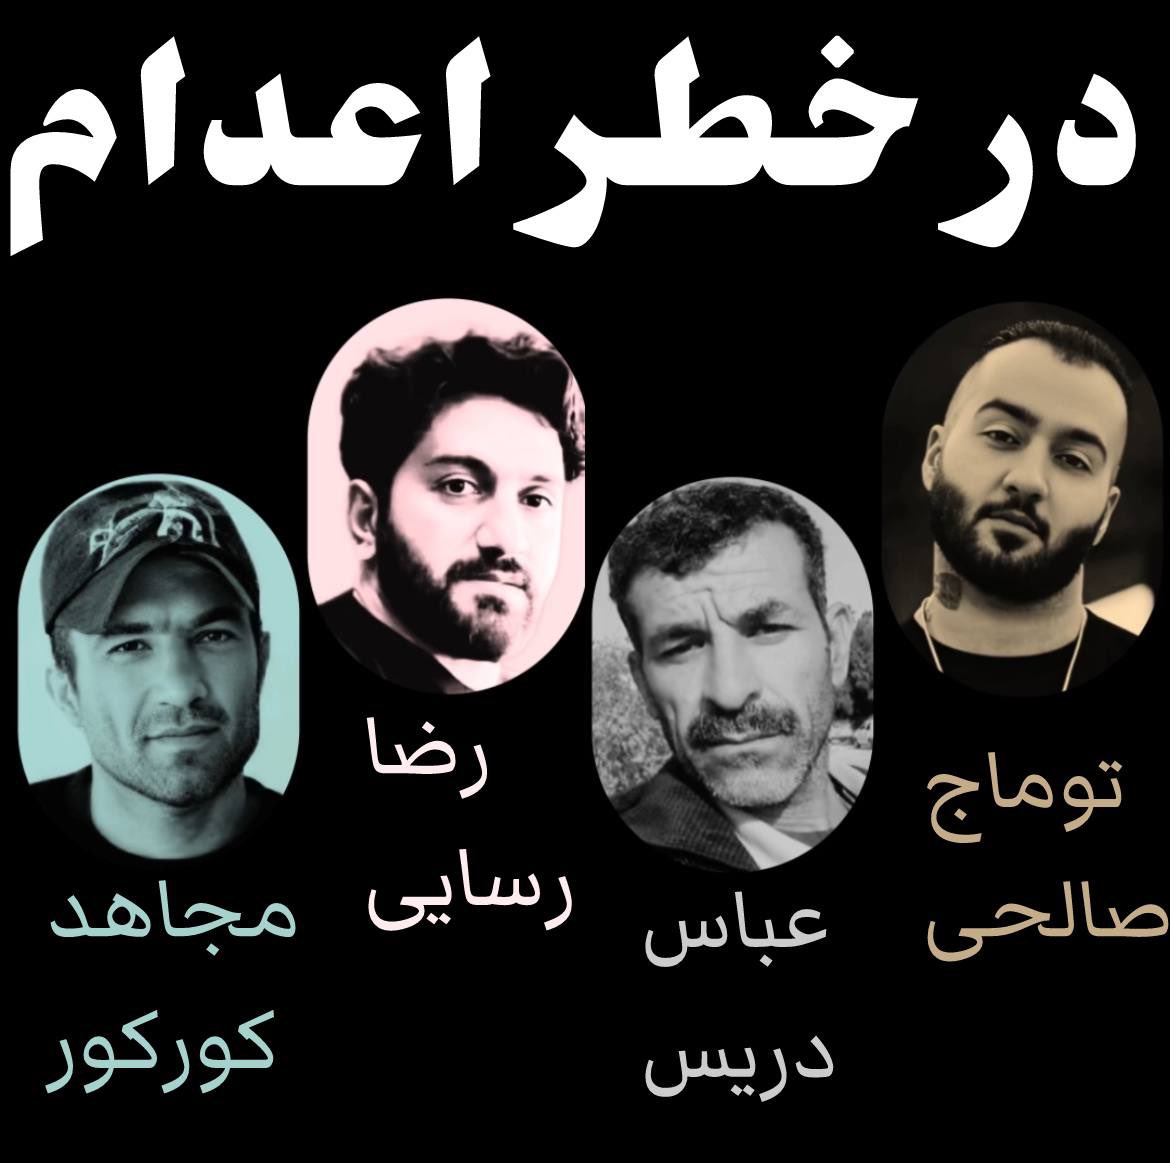 Please be the voice of these political prisoners who peacefully demanded their rights, and for that have been sentenced to execution. 
#MojahedKourkour #RezaRasaei #AbbasDeris #ToomajSalehi